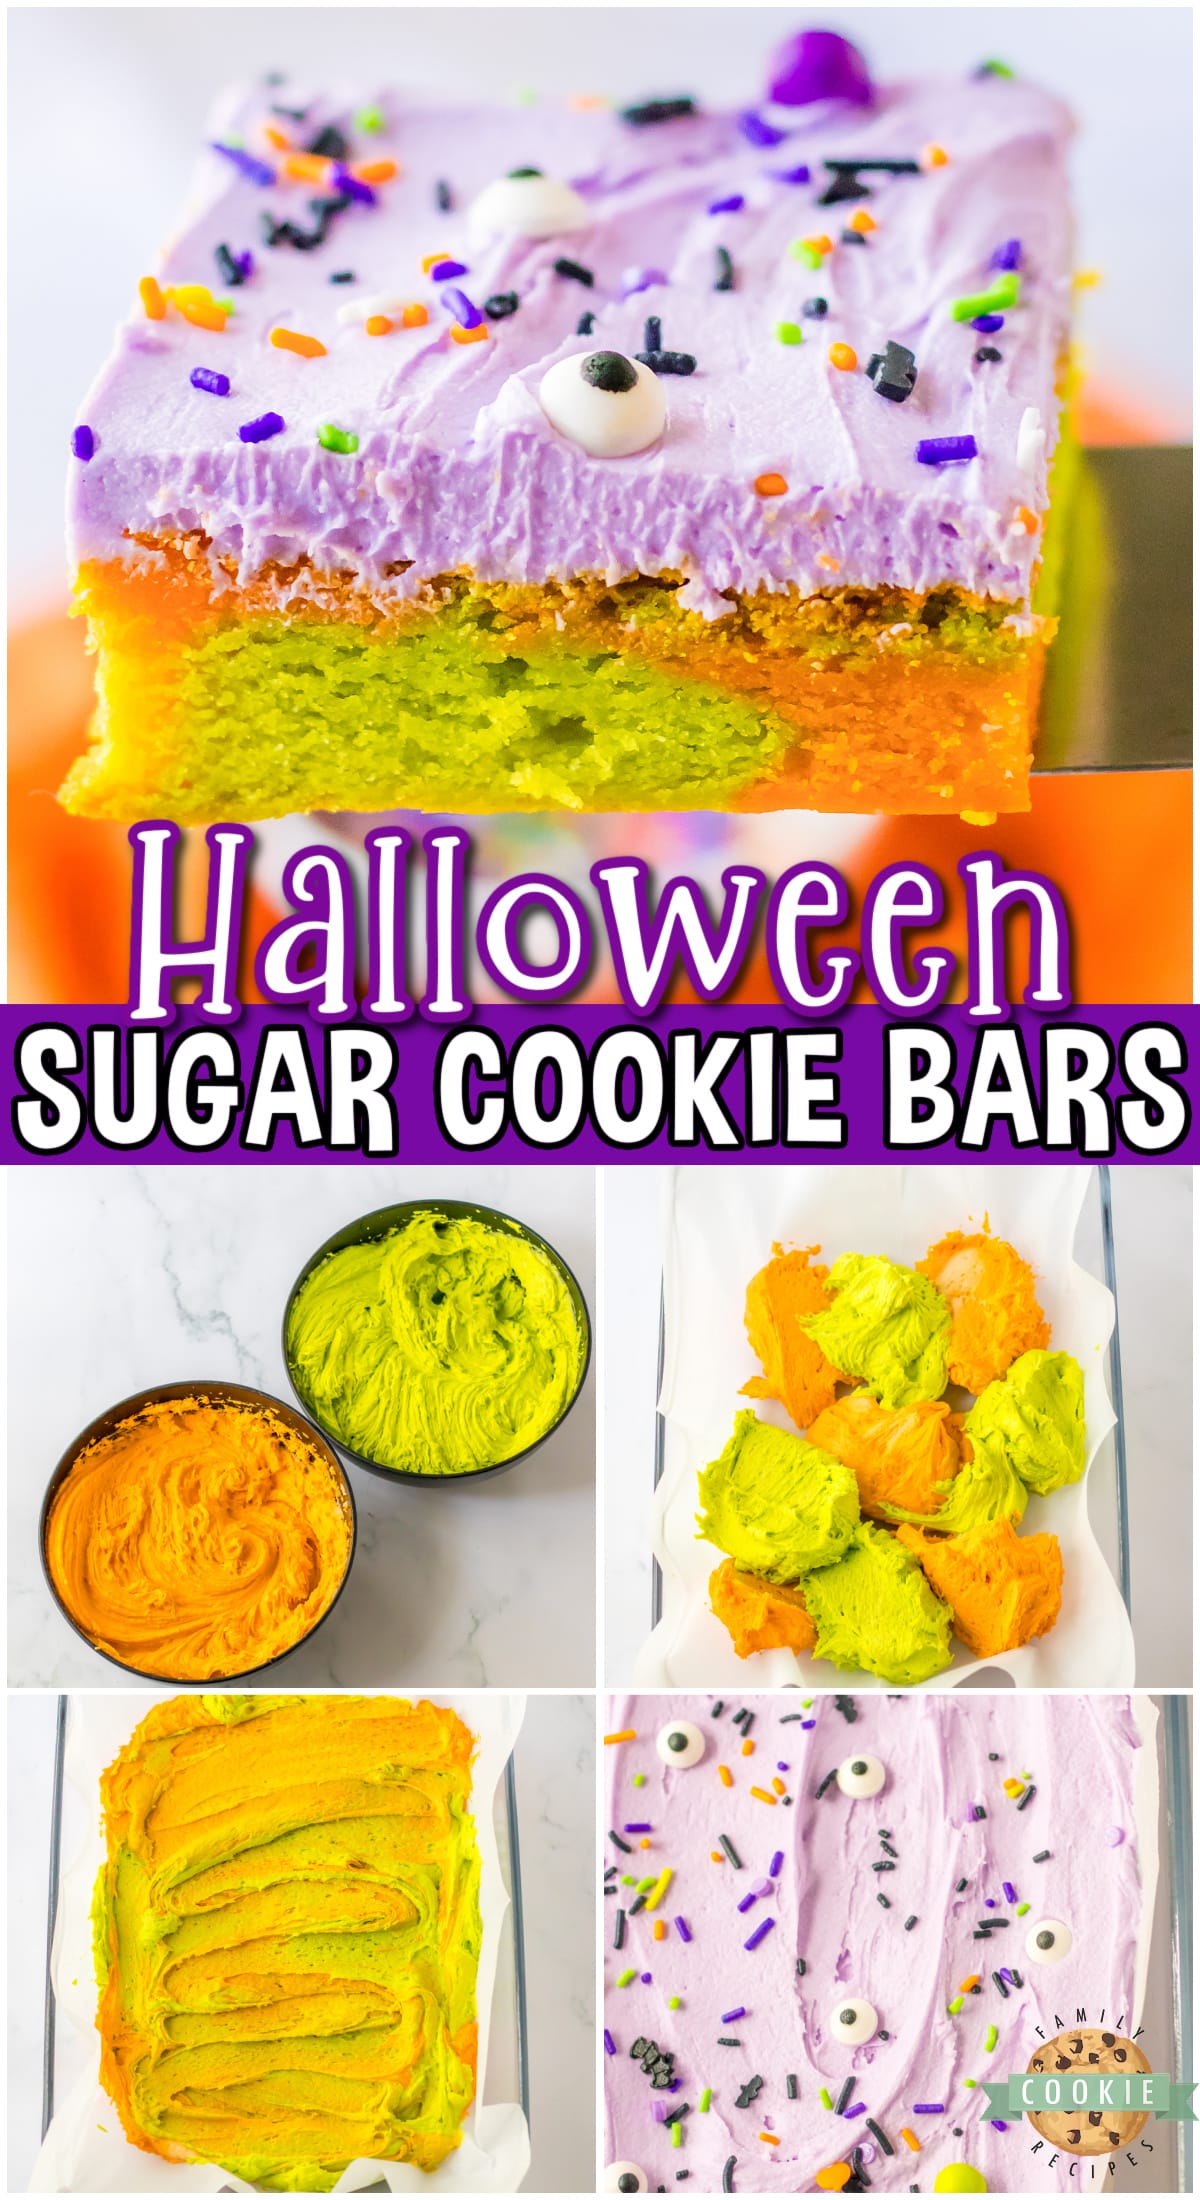 Halloween Sugar Cookie Bars are chewy, marbled cookie bars topped with purple buttercream frosting & spooky sprinkles! A festive treat perfect for Halloween parties!